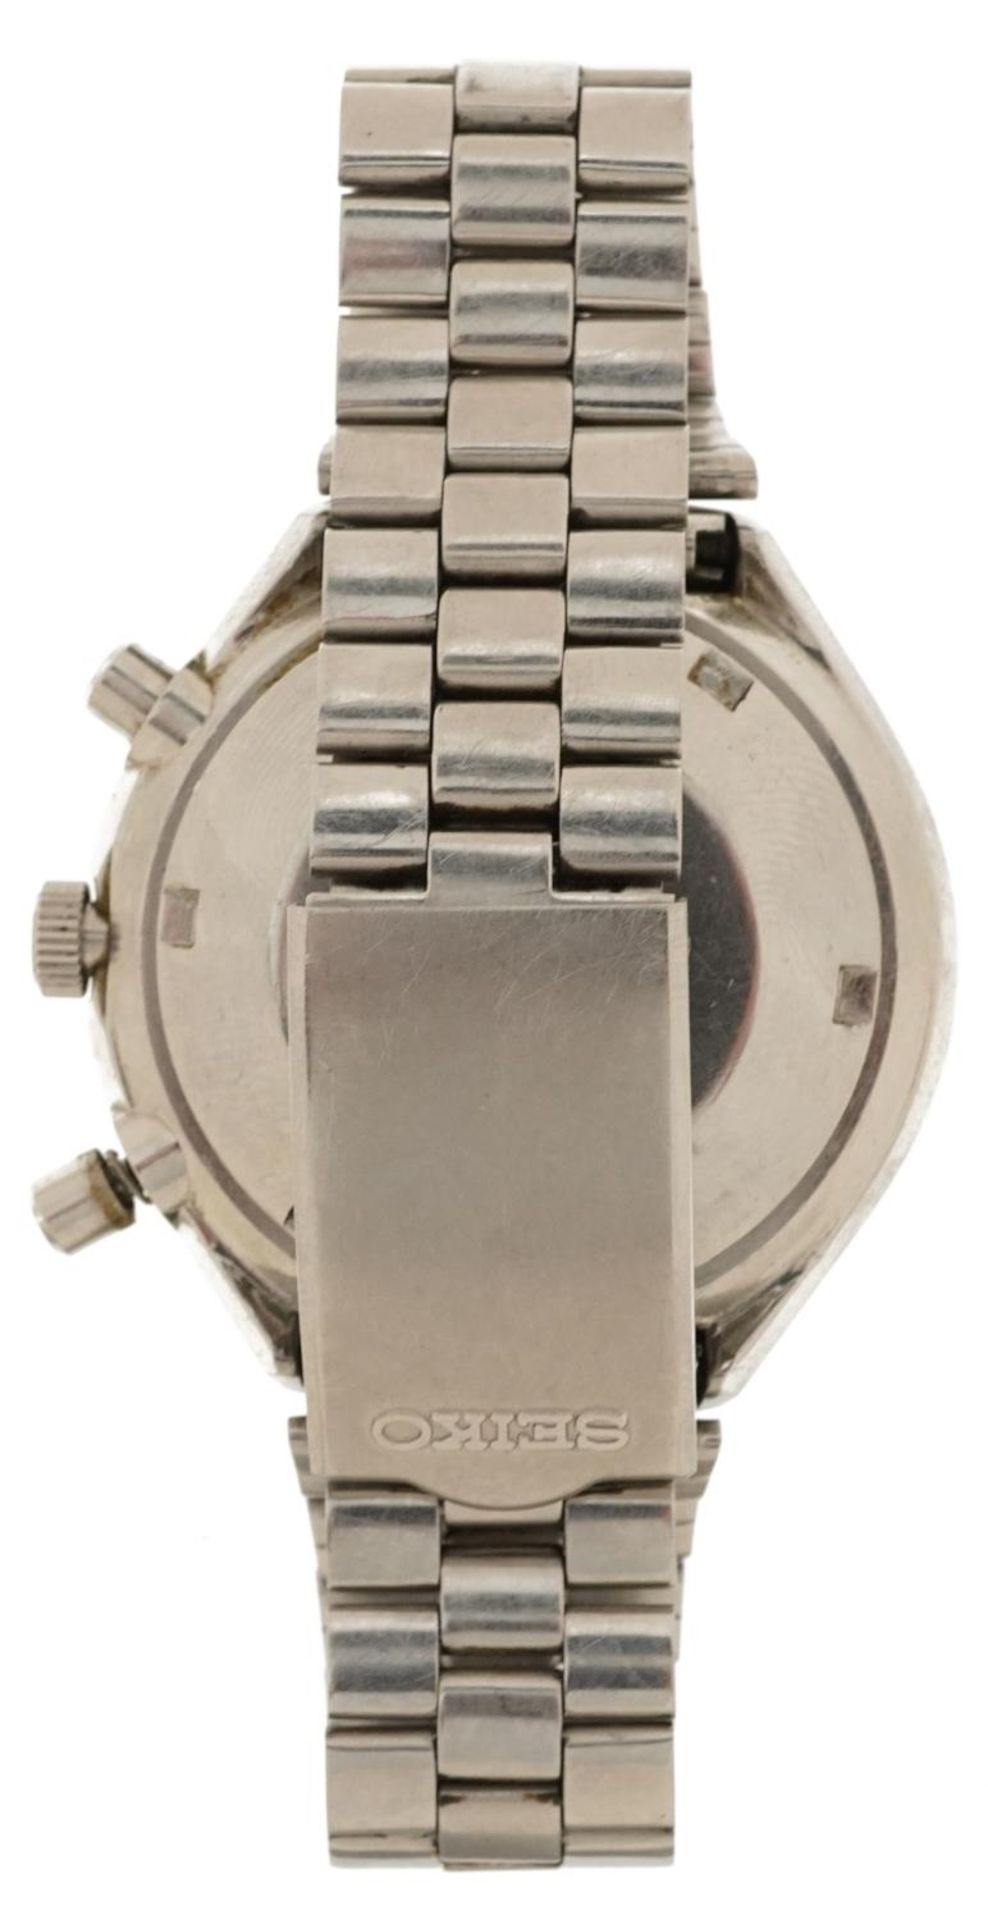 Seiko, gentlemen's 1970s Seiko chronograph automatic 6138-8030 wristwatch with day/date aperture, - Image 3 of 8